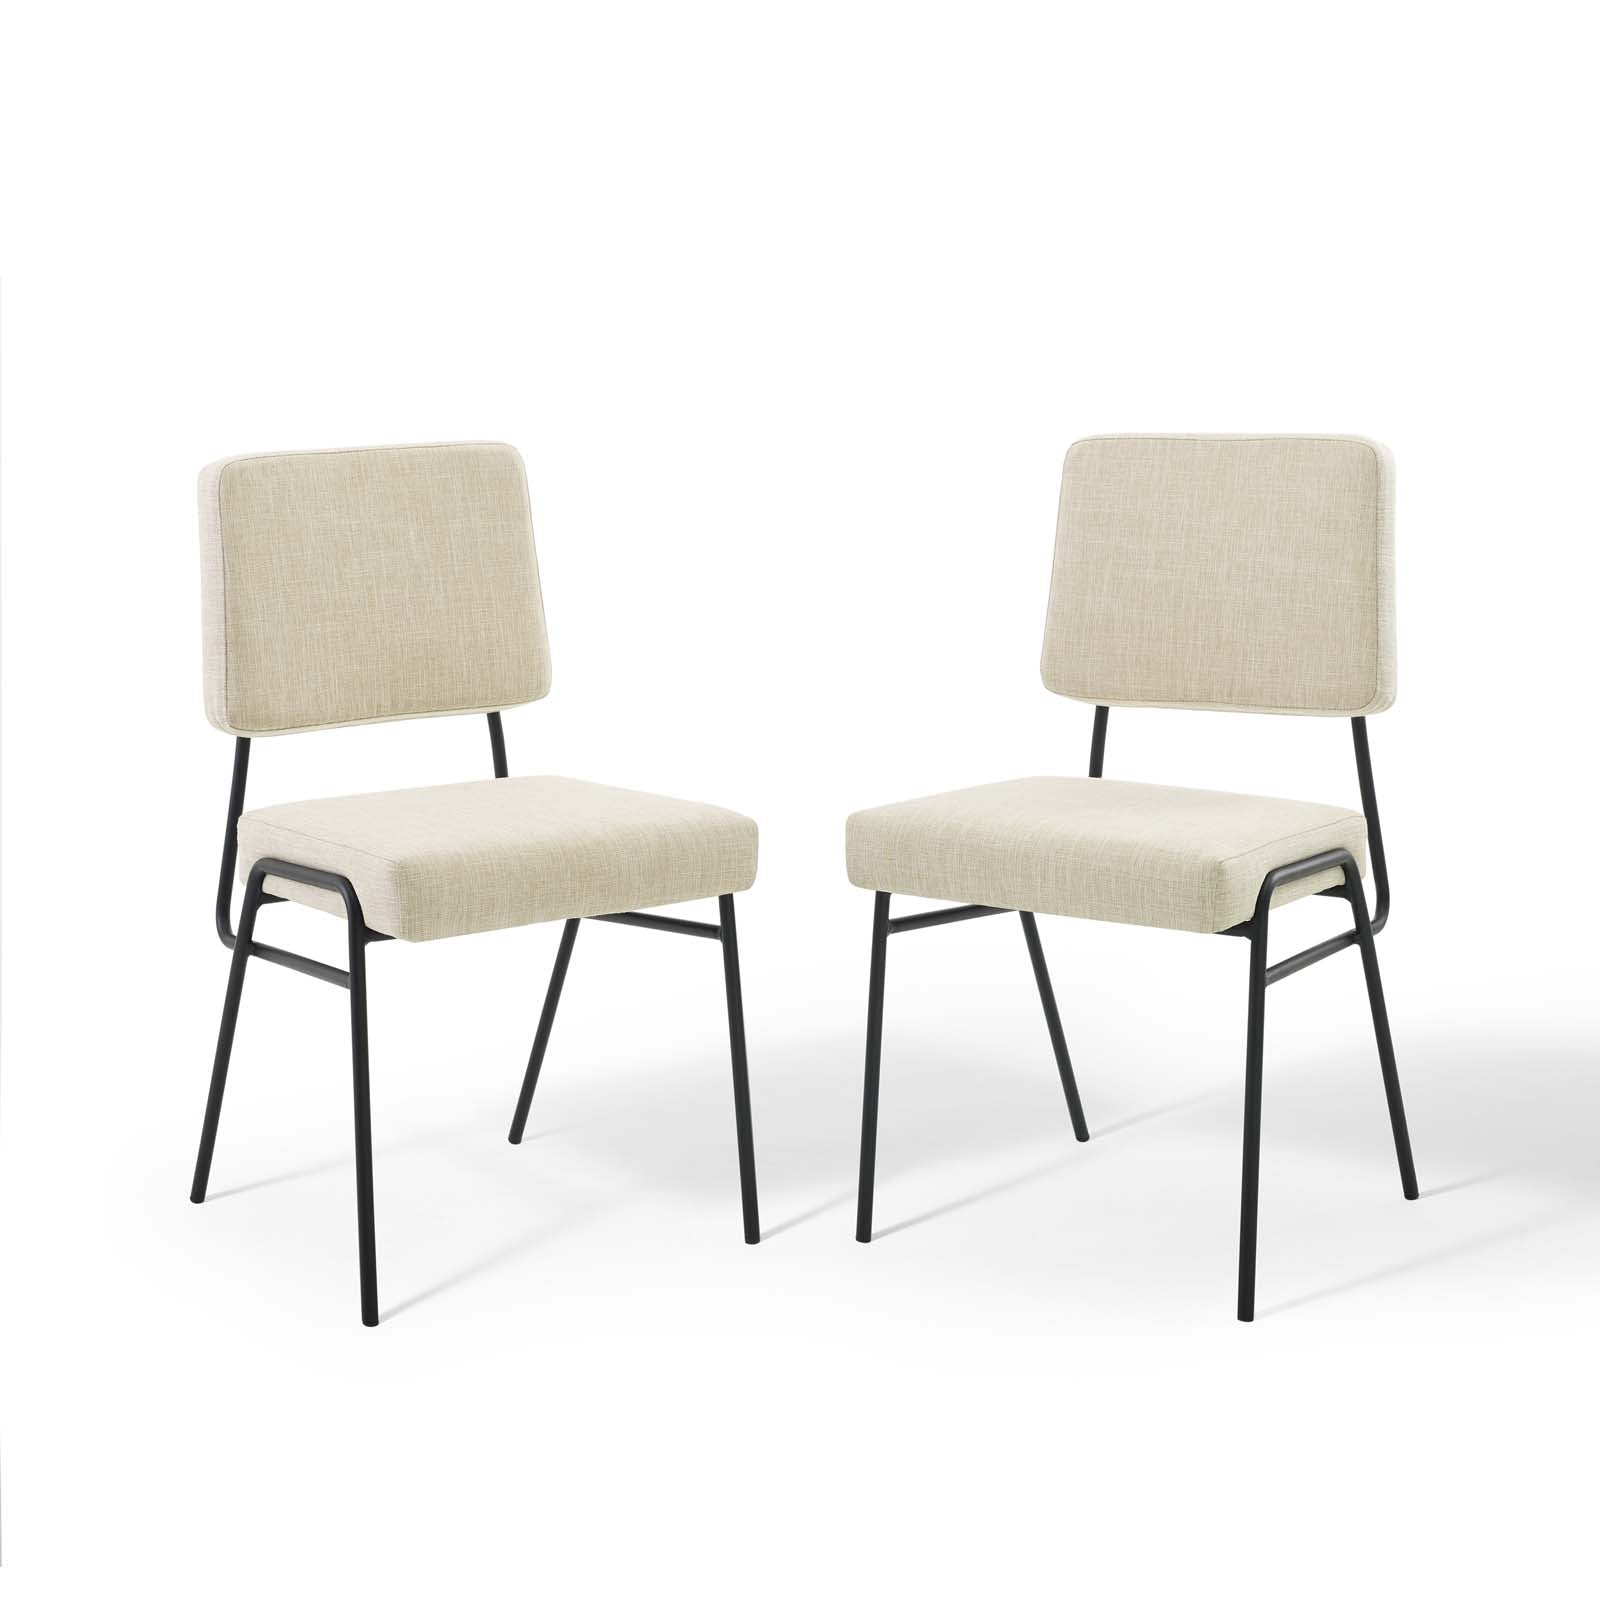 Craft Dining Side Chair Upholstered Fabric Set of 2 - East Shore Modern Home Furnishings